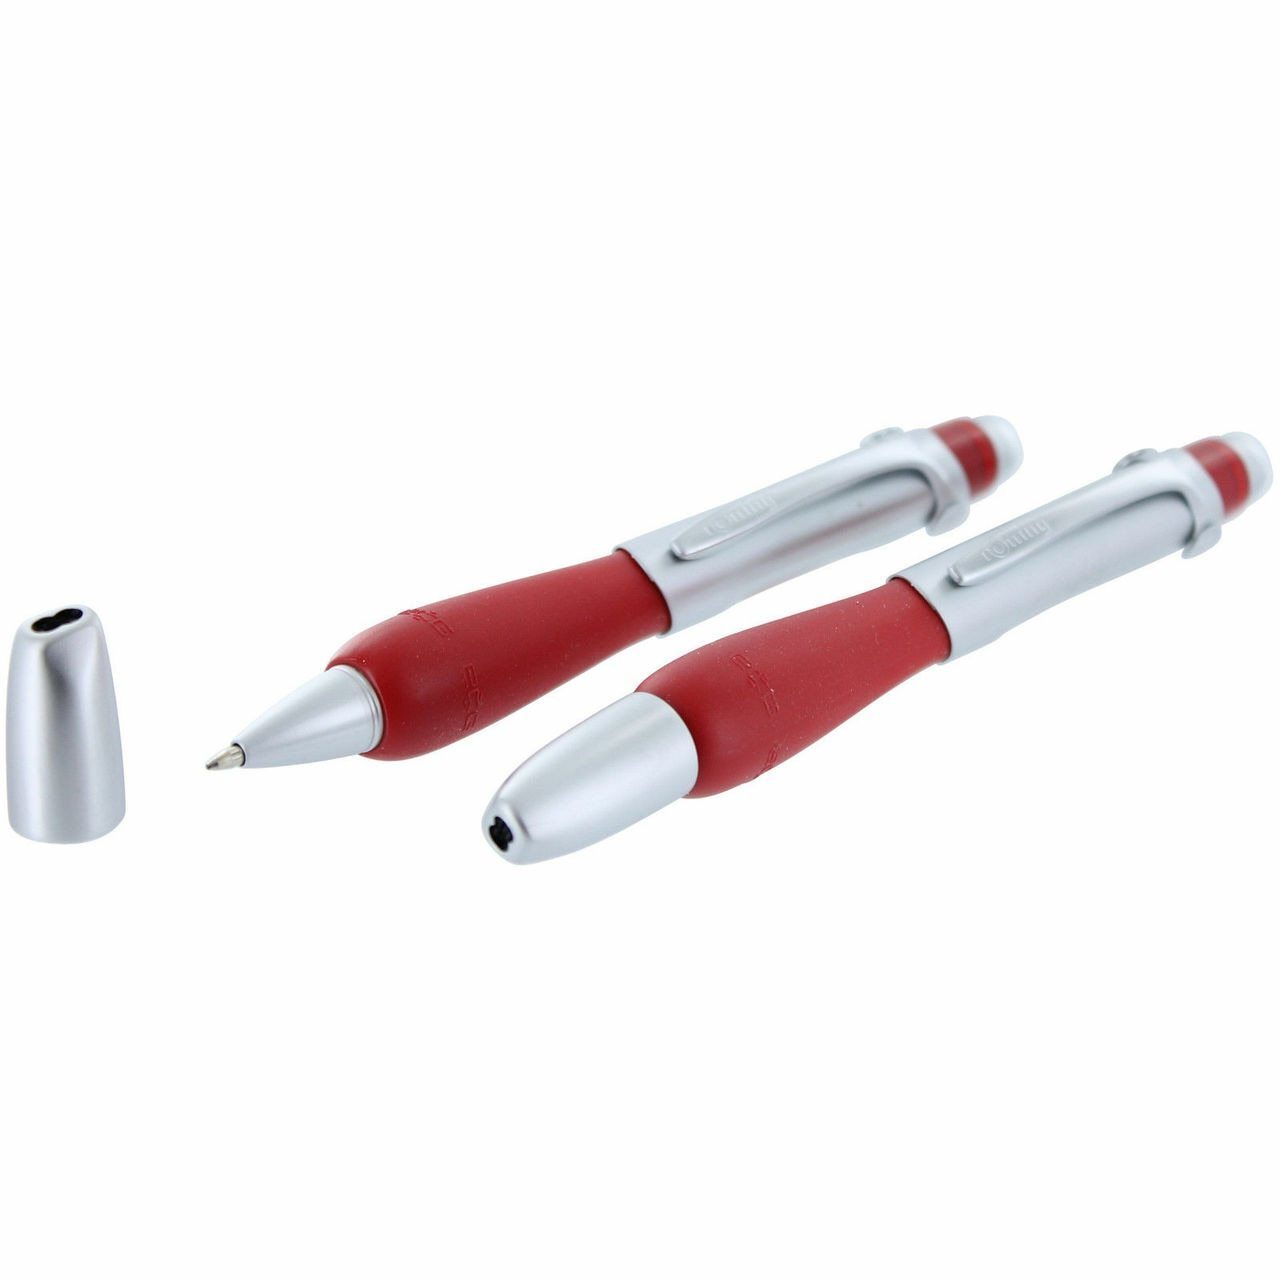 Two 2-Pack Rotring Skynn Ergonomic Roller Ball Pens With Comfort Grip in Warm Red, on a white background.